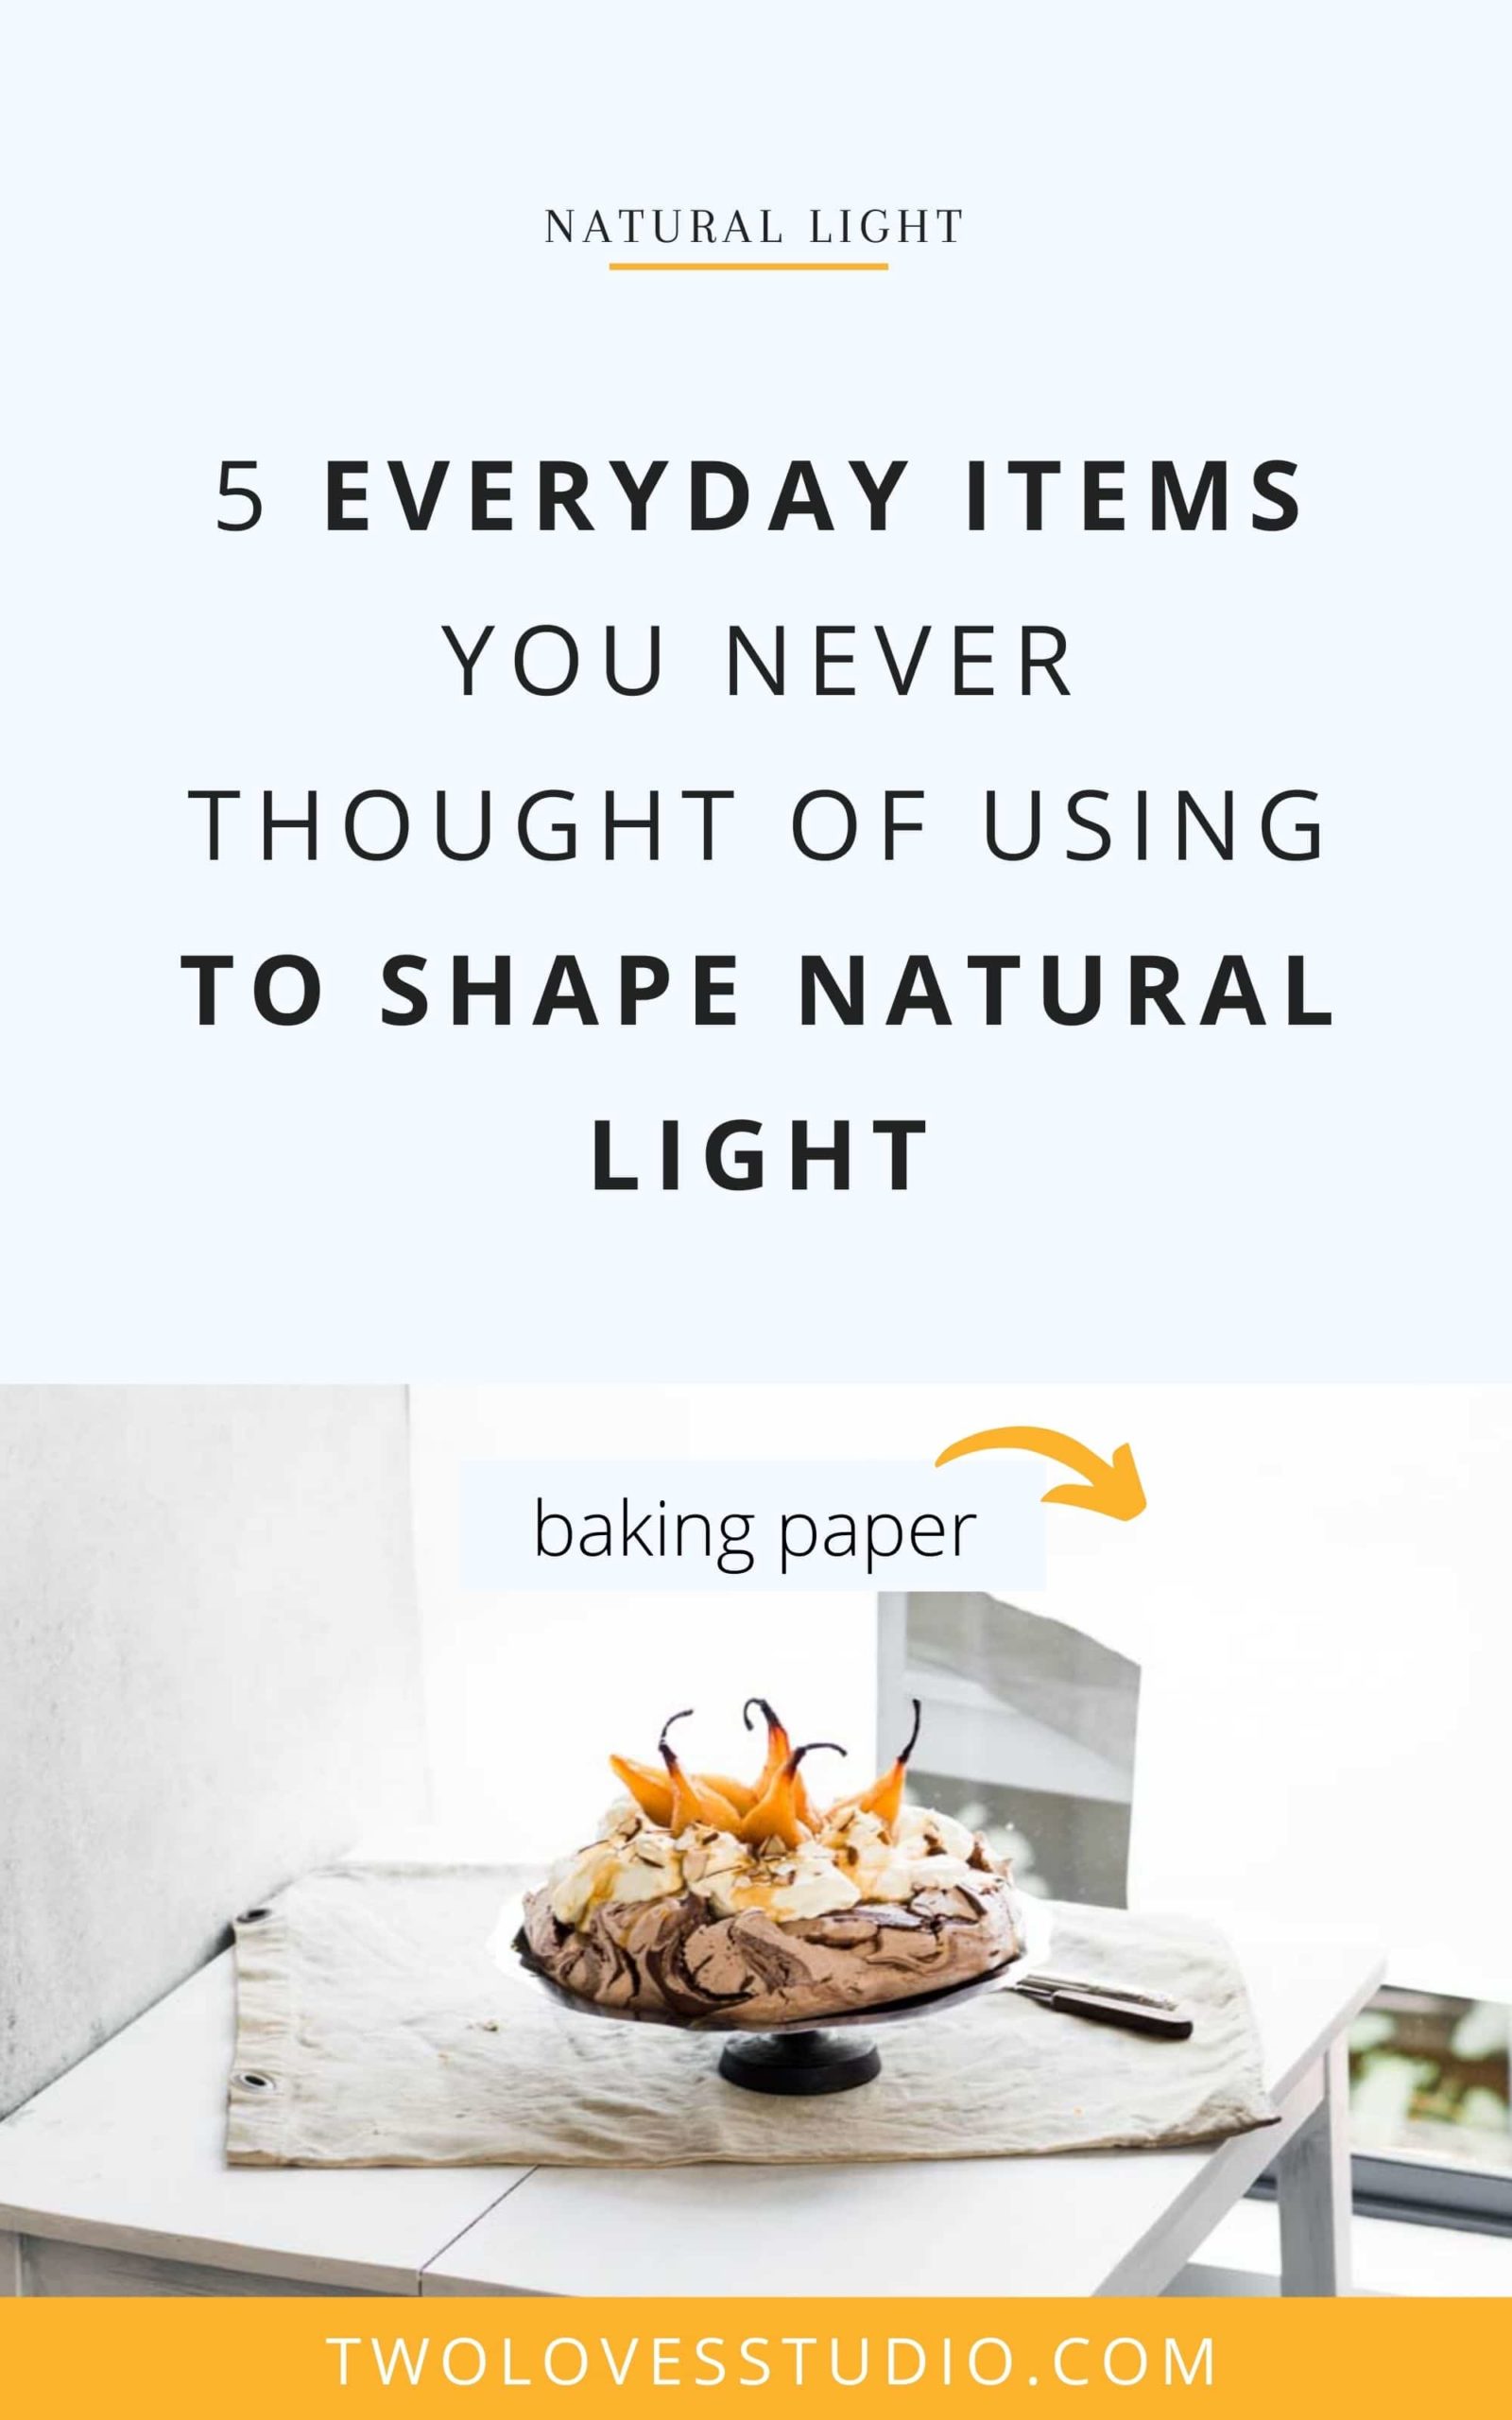 https://twolovesstudio.com/wp-content/uploads/2020/12/5-Creative-Ways-To-Use-Everyday-Items-to-Shape-Natural-Light_1-scaled.jpg